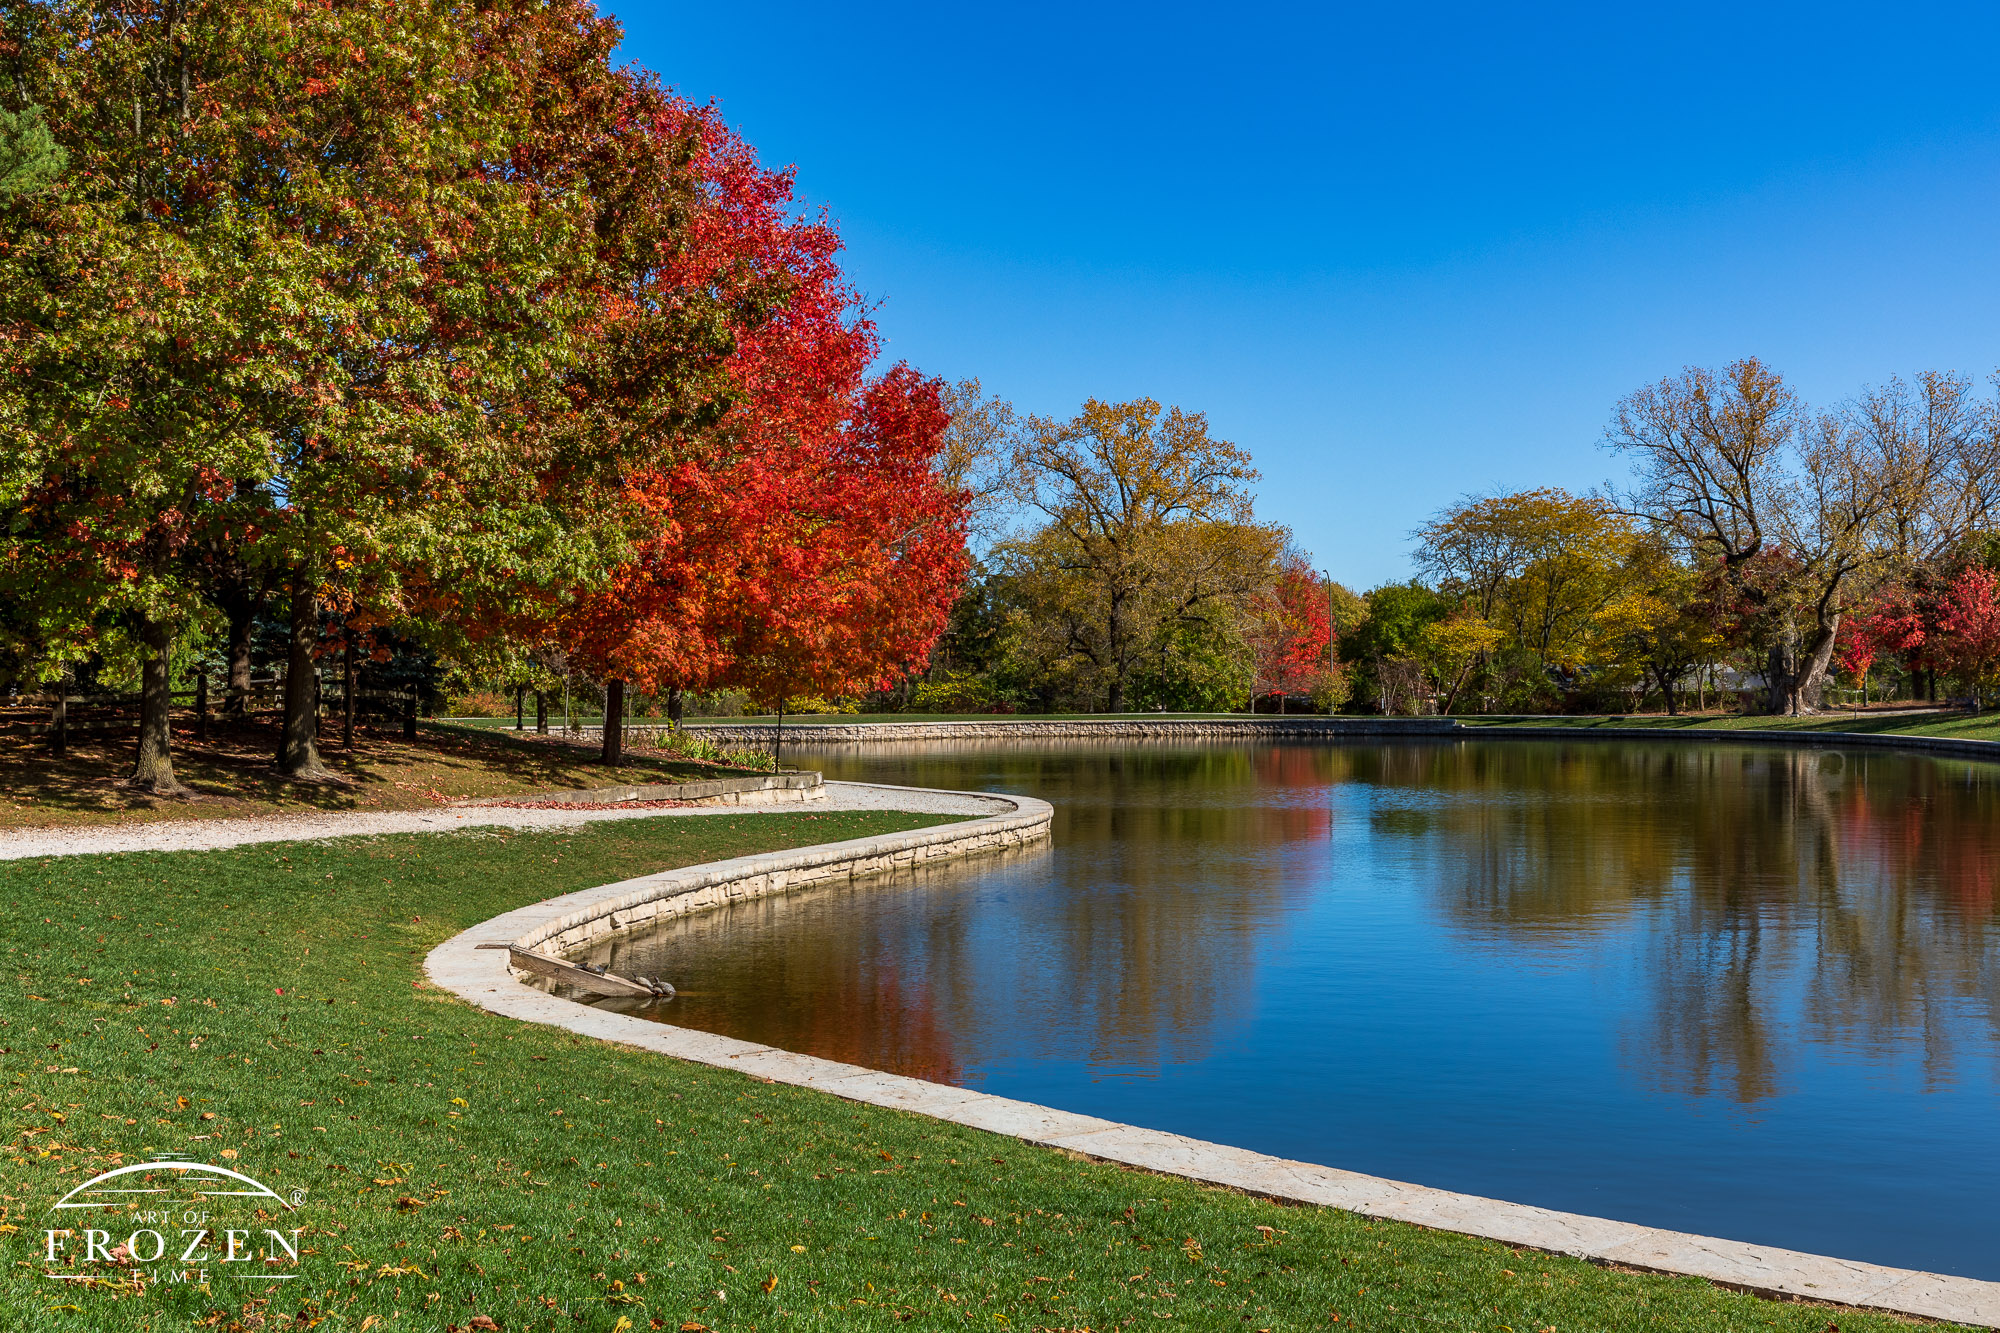 Under burning blue skies, Kettering’s Civic Park Commons displays impressive fall colors as the pond wall leads the viewer into the scene